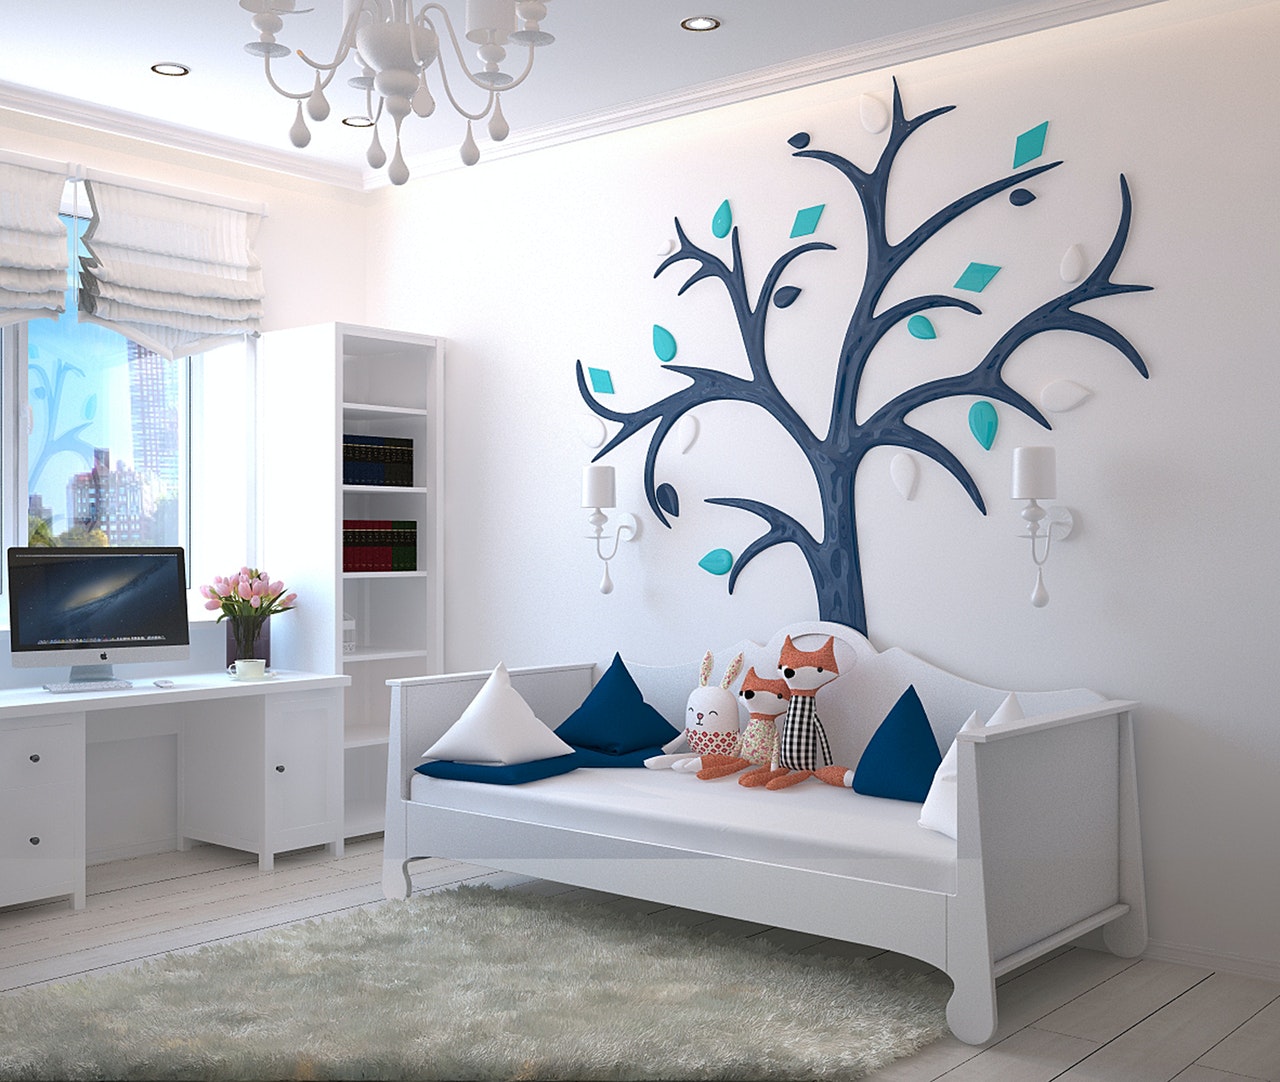 A room that grows with your child